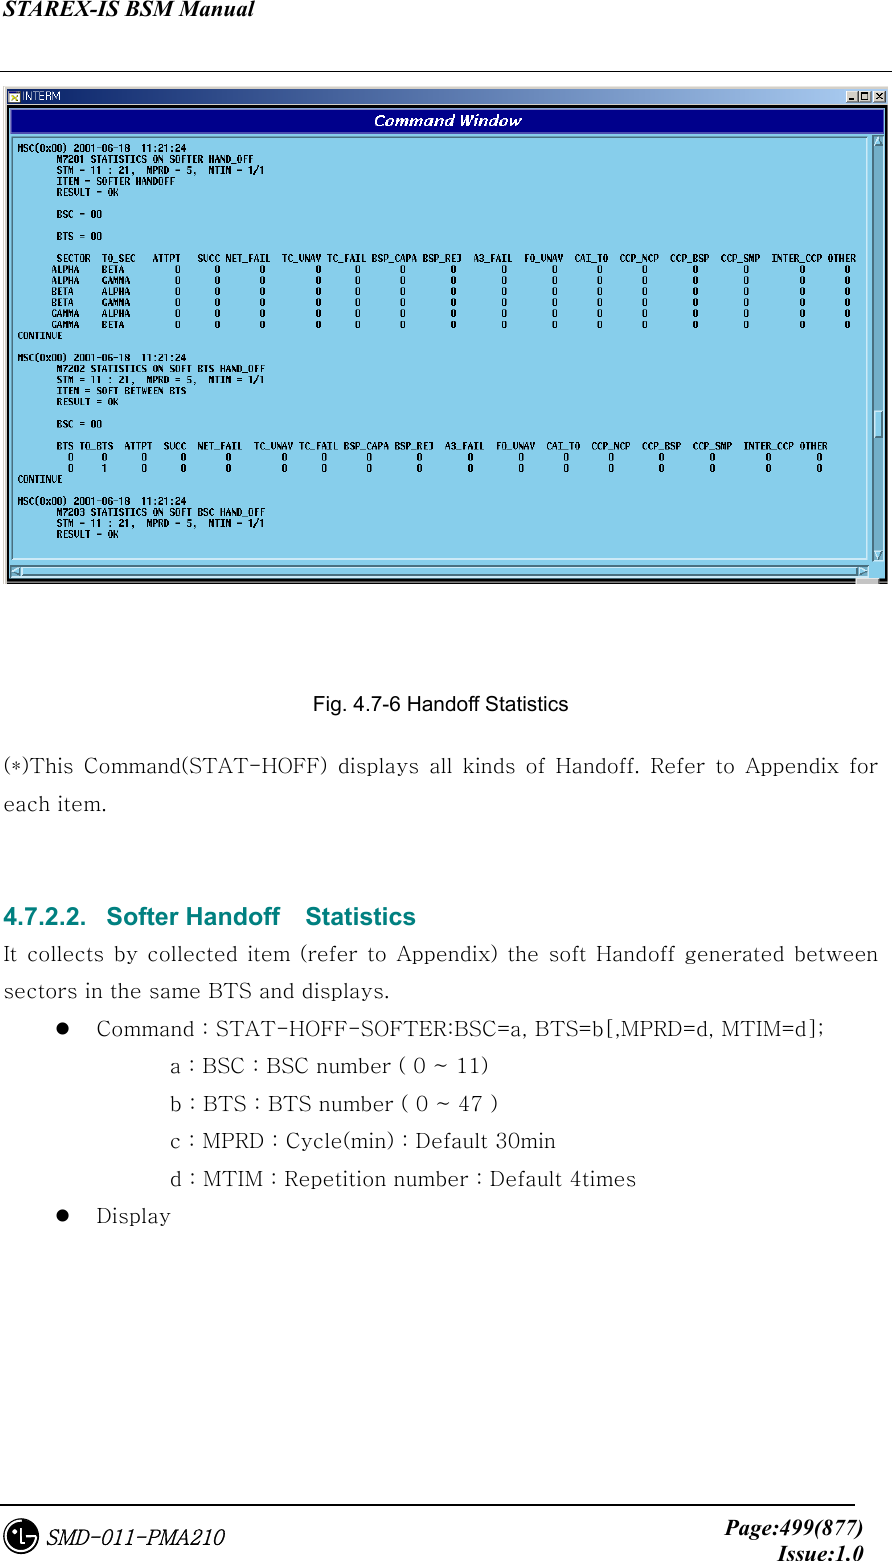 STAREX-IS BSM Manual     Page:499(877)Issue:1.0SMD-011-PMA210   Fig. 4.7-6 Handoff Statistics (*)This  Command(STAT-HOFF)  displays all kinds of Handoff. Refer to Appendix for each item.   4.7.2.2.  Softer Handoff  Statistics It collects by collected item (refer to Appendix) the soft Handoff  generated  between sectors in the same BTS and displays.   Command : STAT-HOFF-SOFTER:BSC=a, BTS=b[,MPRD=d, MTIM=d];     a : BSC : BSC number ( 0 ~ 11)     b : BTS : BTS number ( 0 ~ 47 )     c : MPRD : Cycle(min) : Default 30min     d : MTIM : Repetition number : Default 4times   Display 